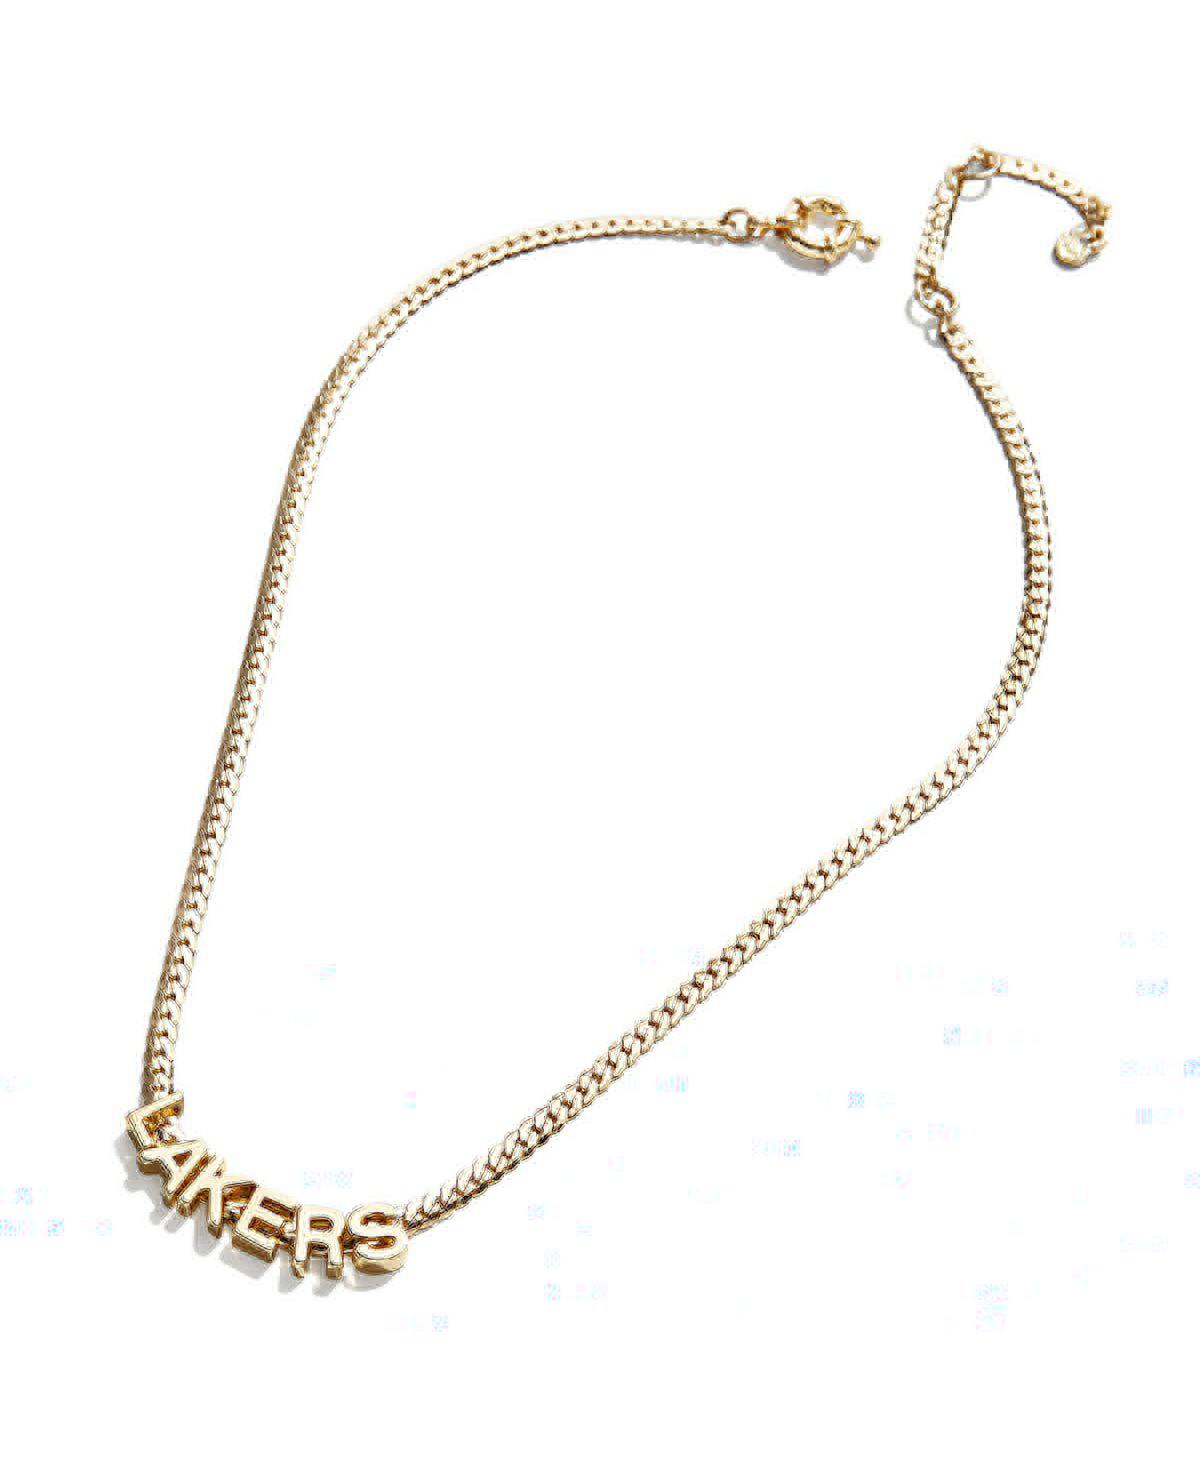 BAUBLEBAR WOMEN'S BAUBLEBAR LOS ANGELES LAKERS TEAM CHAIN NECKLACE